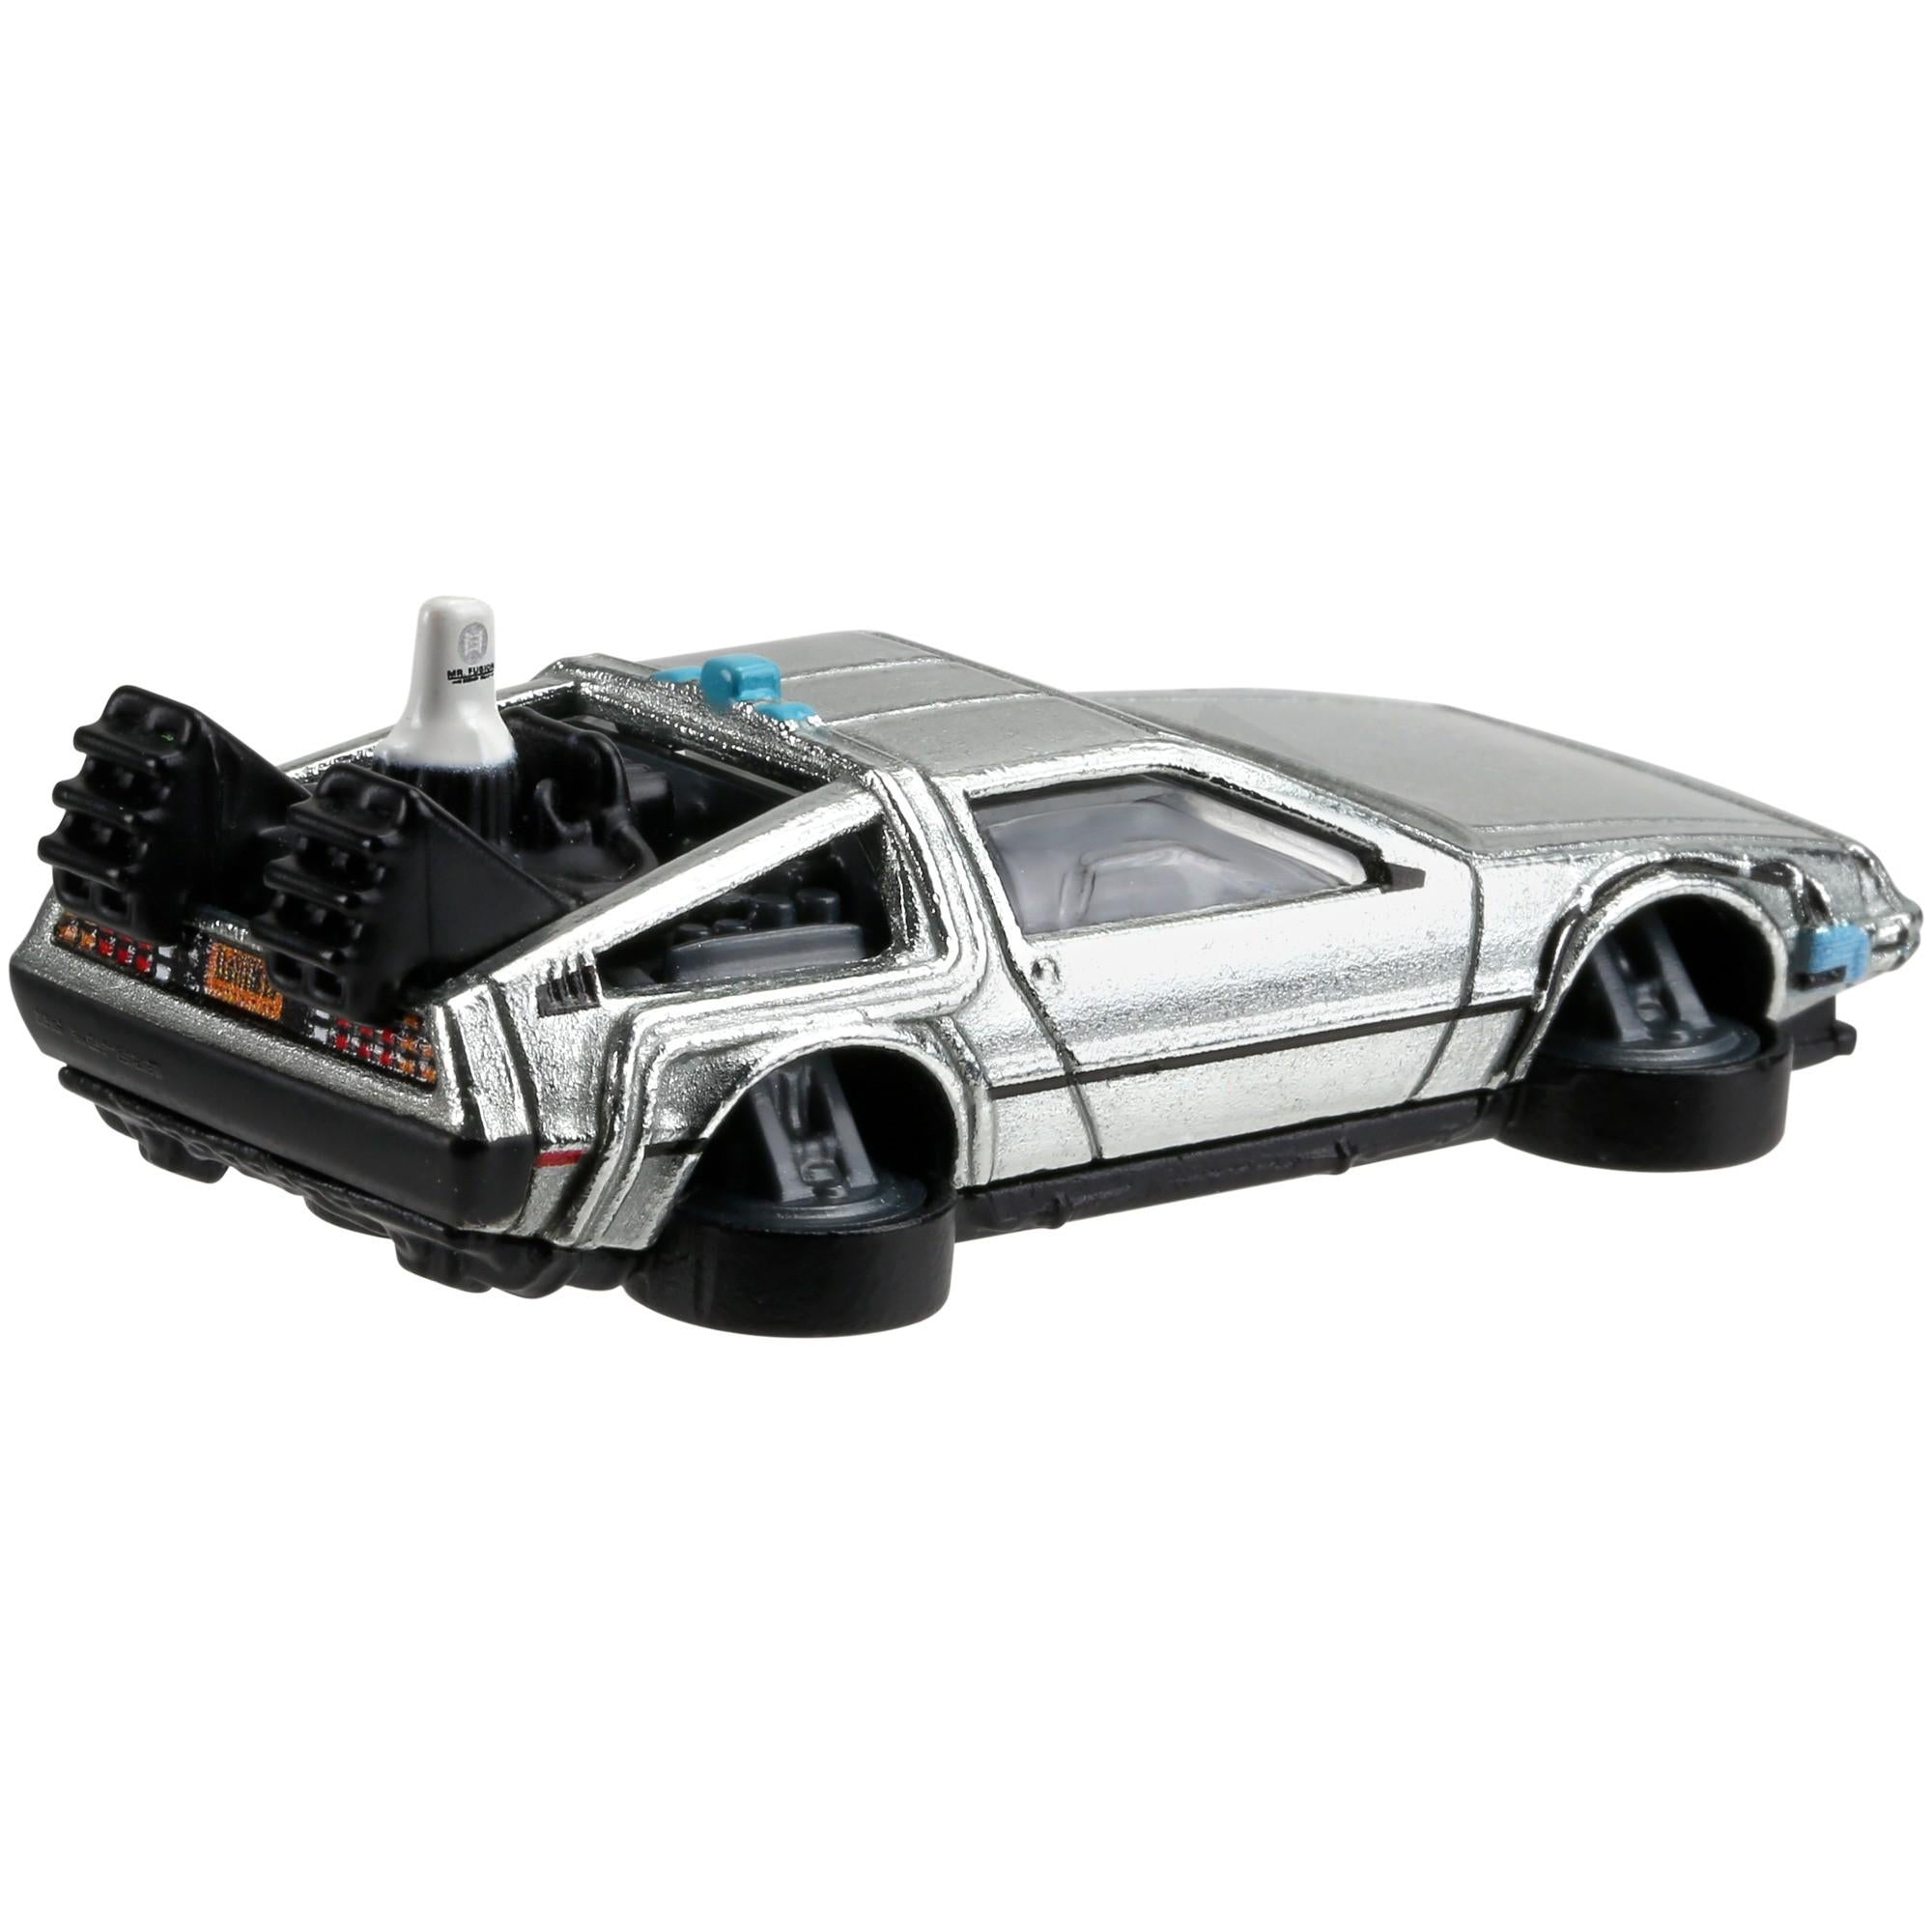 Hot Wheels Back to the Future II Time Machine Vehicle – Square Imports